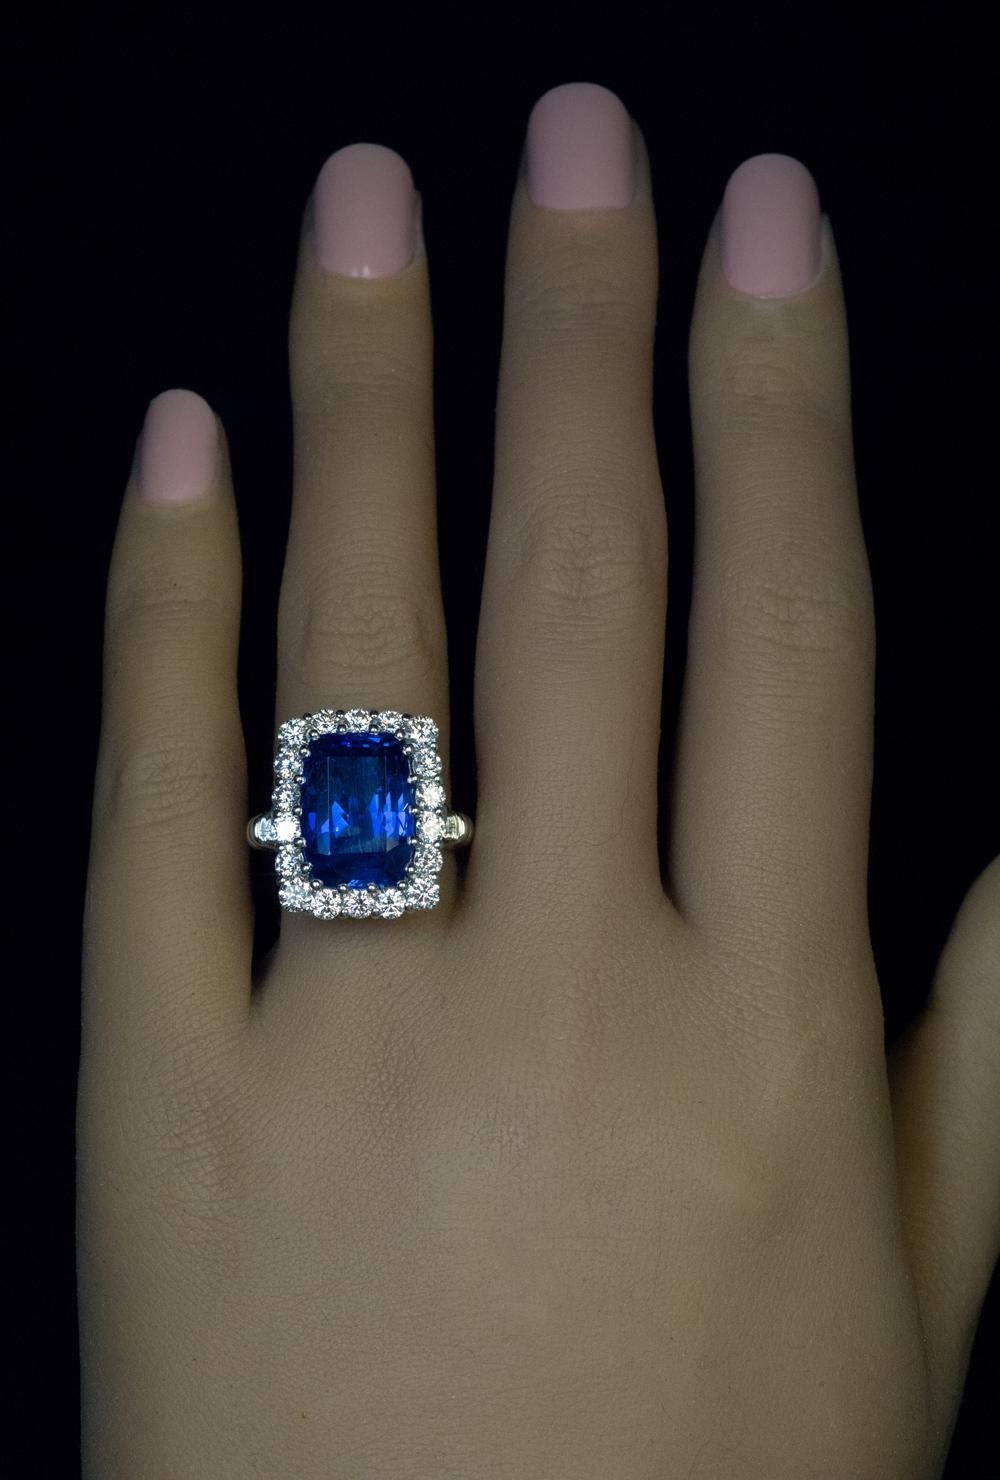 An 11.51 ct old mine cut Ceylon sapphire of a vivid blue color is set in a modern platinum and diamond ring.
The diamonds are bright white and clean: F-G color, VS clarity. Total diamond weight is 1.61 ct.
The sapphire and diamond cluster measures